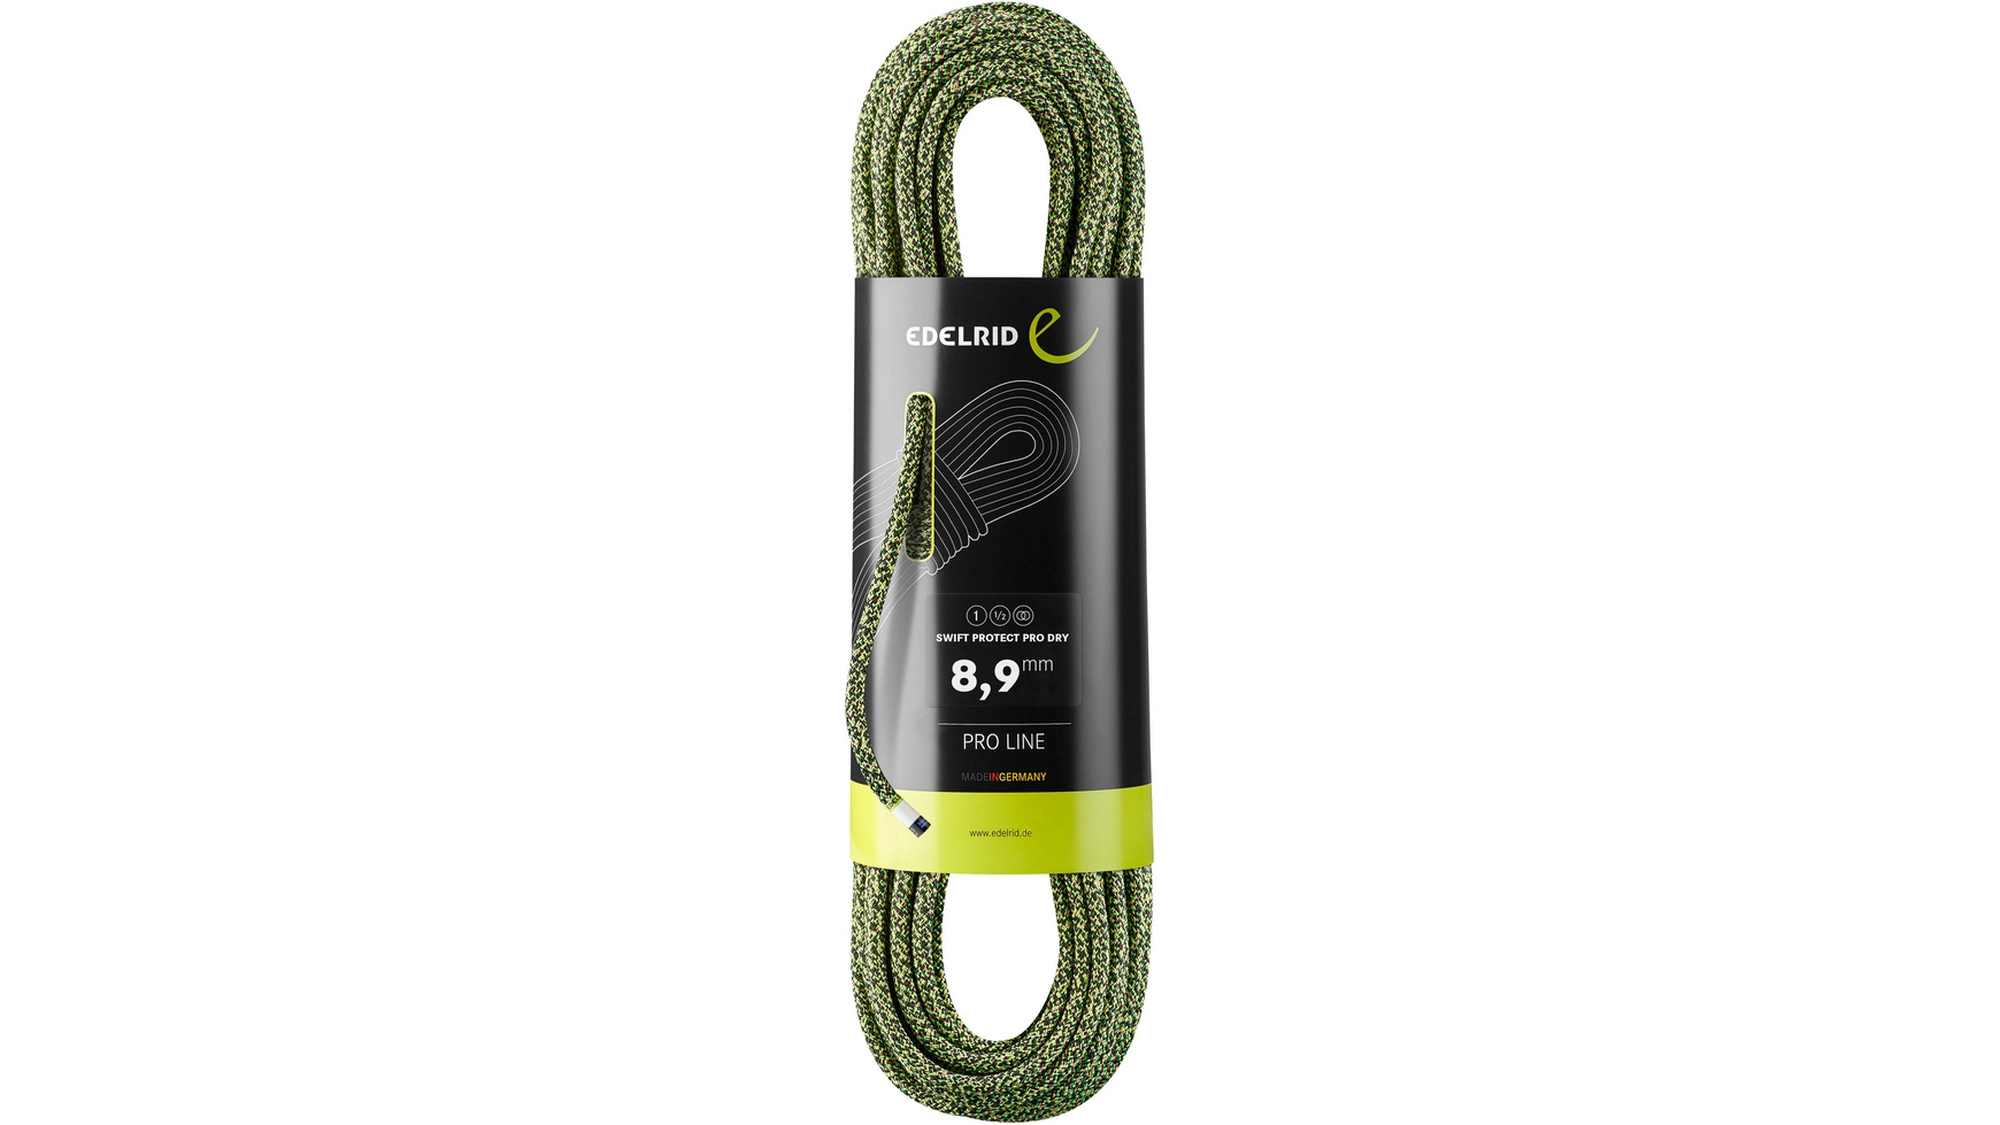 Im Test: Edelrid Swift Protect Pro Dry 8.9 mm